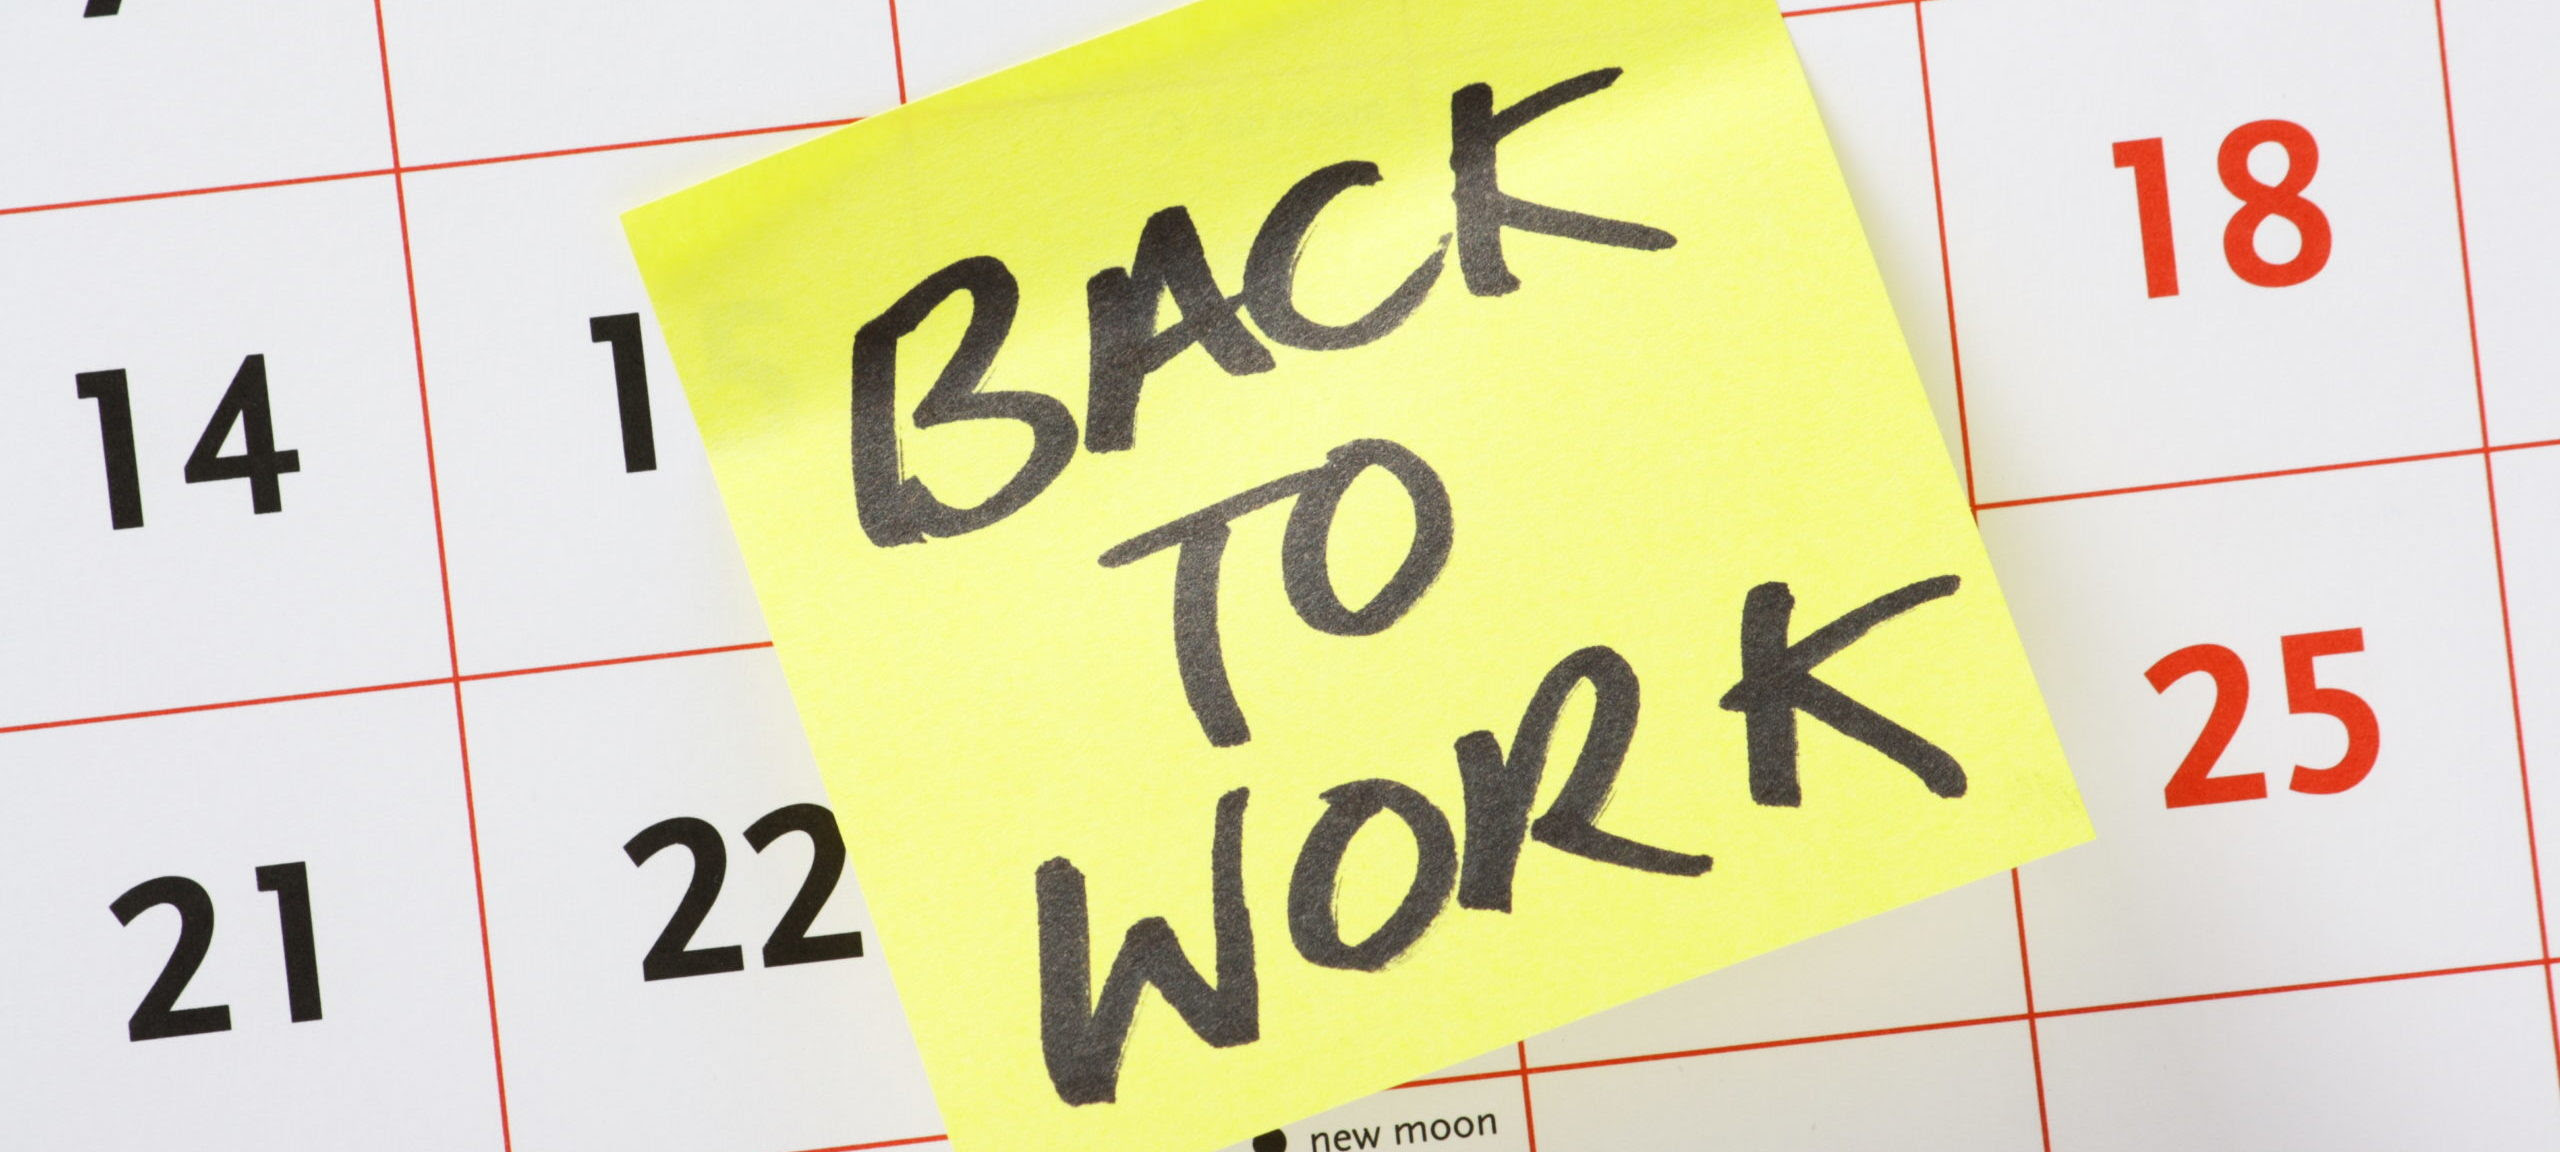 Why employees and employers tend to disagree about return to work policies